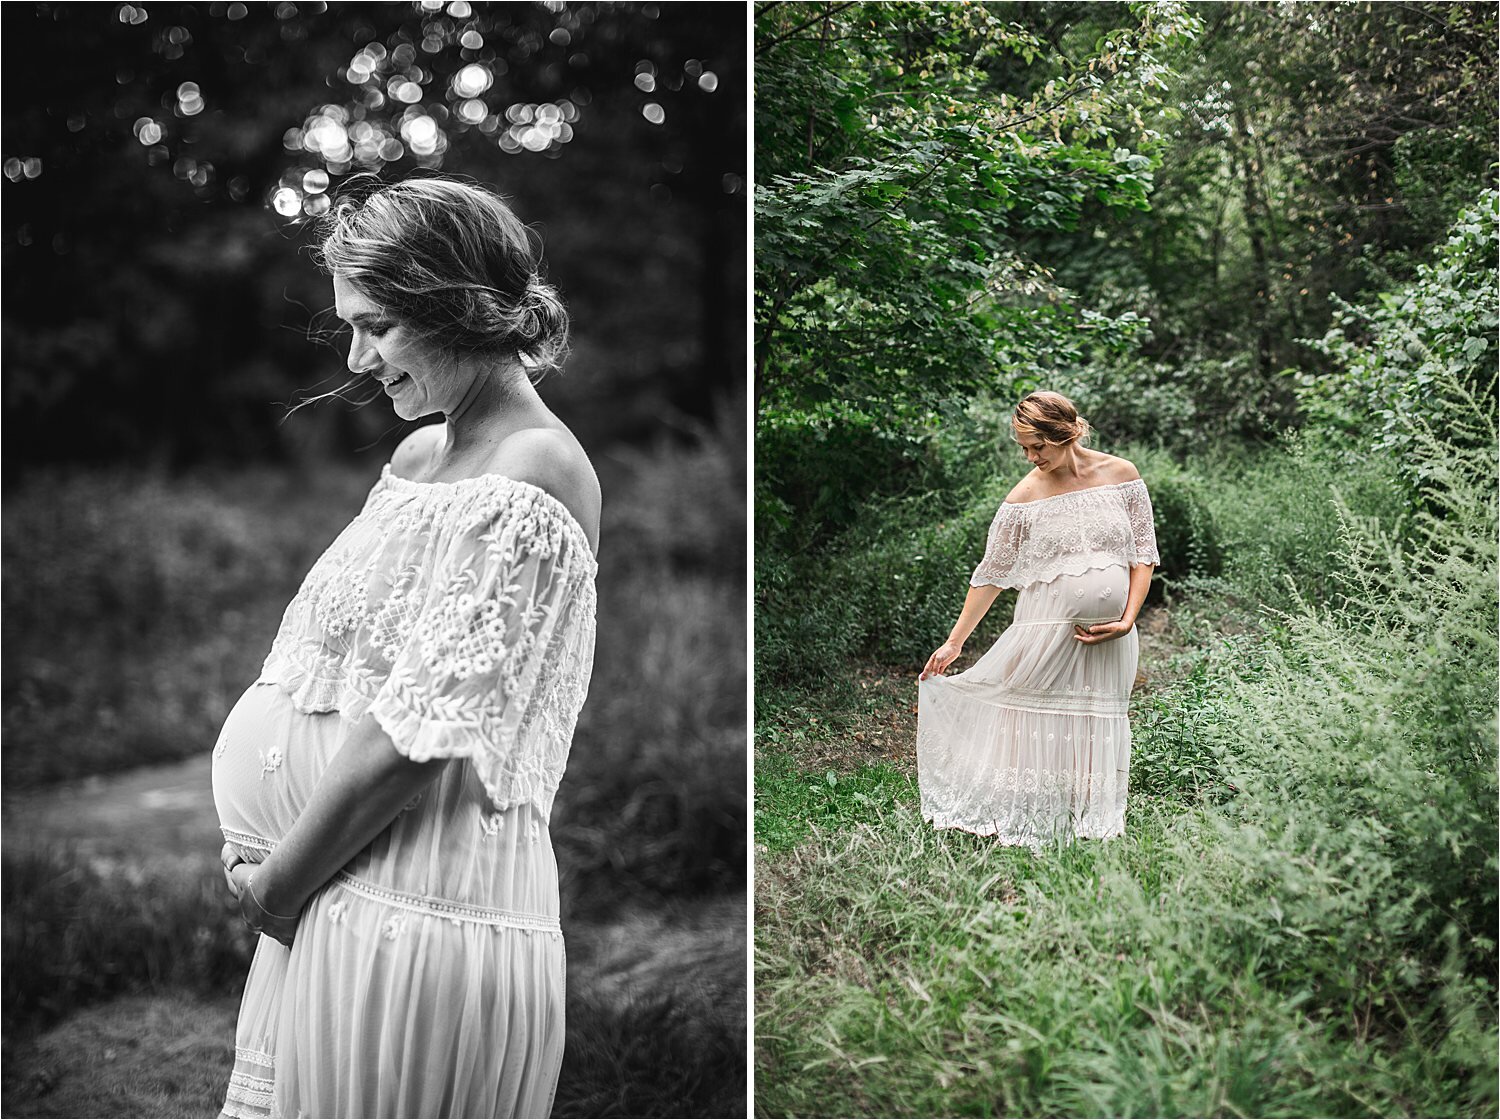 Central_Park_Maternity_Session_with_NYC_Baby_Photographer_Nicole_Hawkins_Photography_September_2019-1_Web.jpg